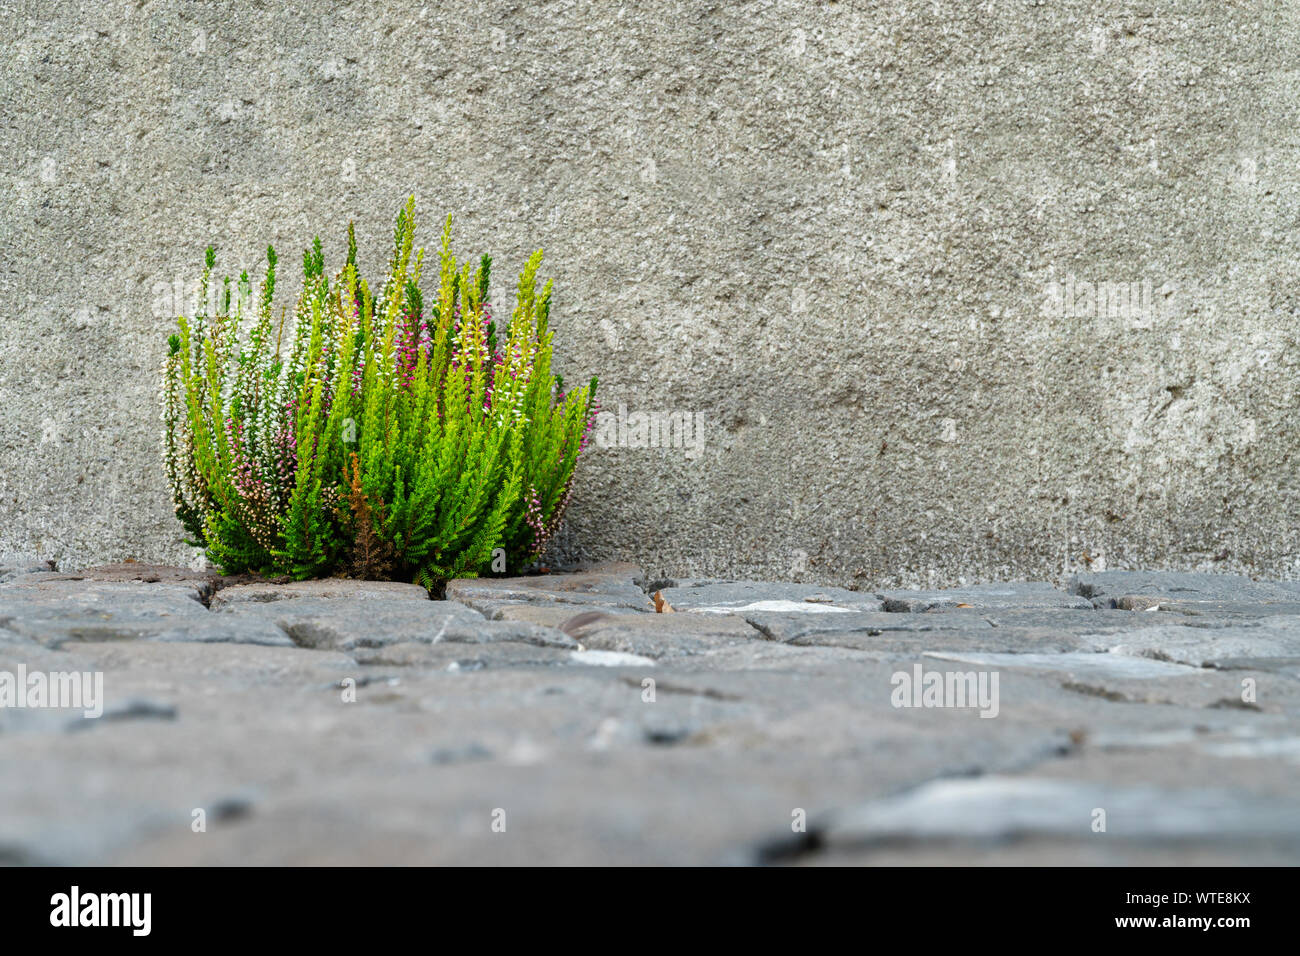 Vibrant green bush of heather with pink and white blossoms in front of a textured gray stone wall and cobblestones in blurred foreground - low angle v Stock Photo